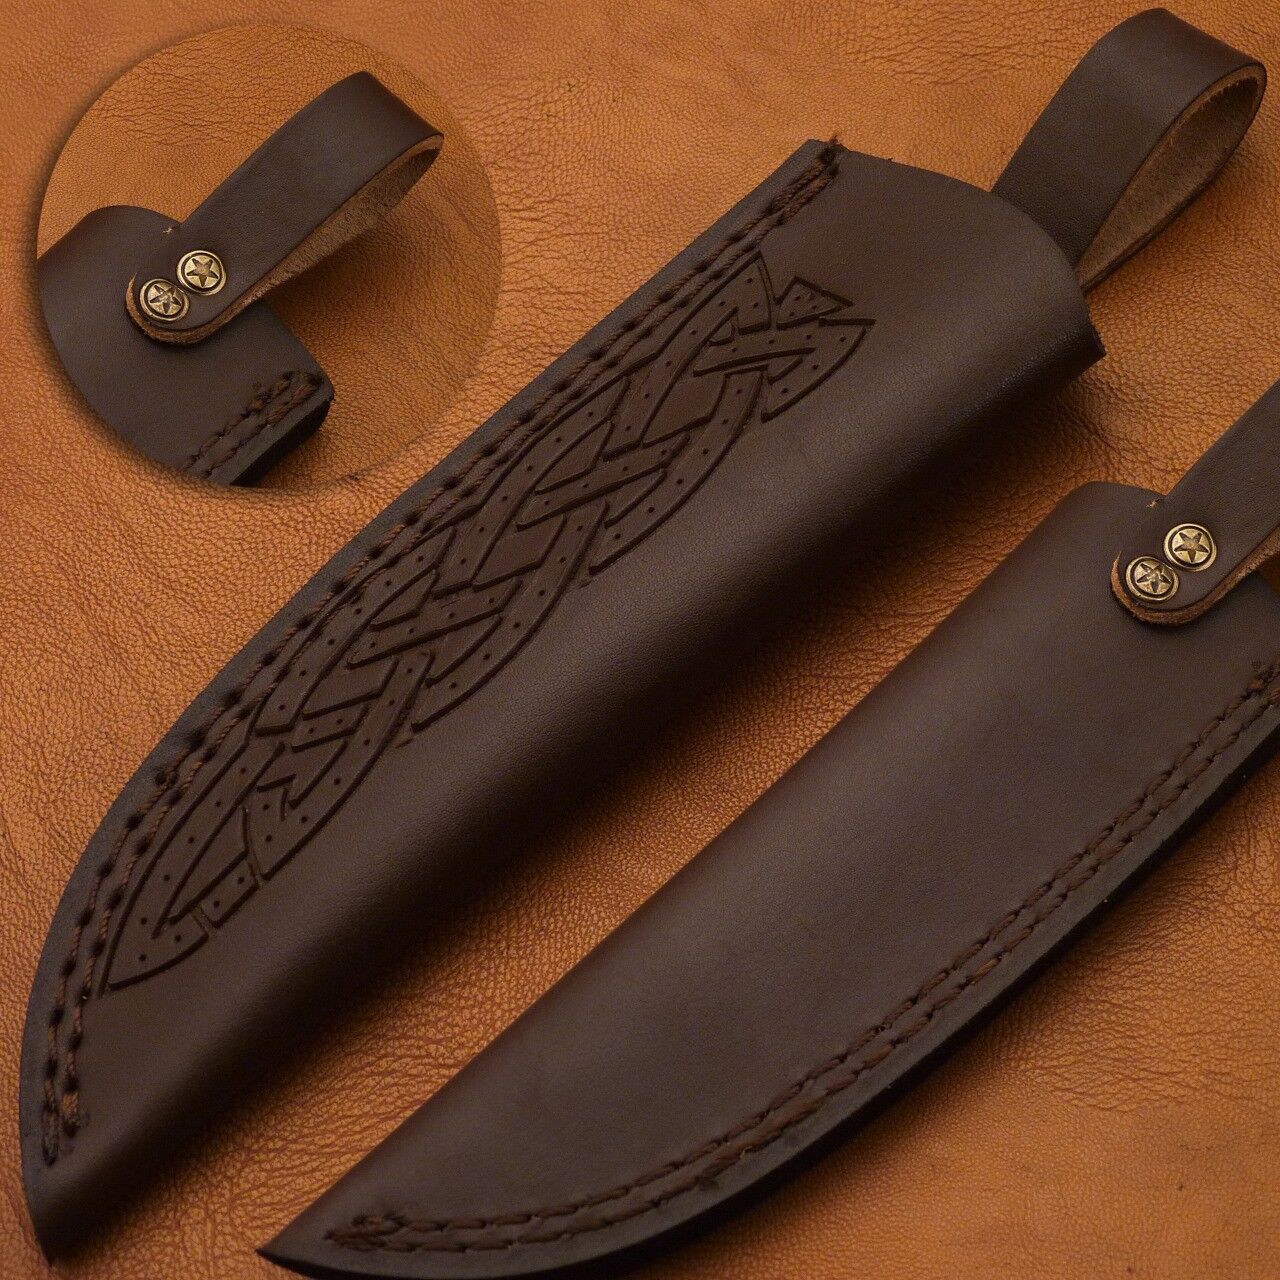 Beautiful Leather sheath fits 8inches 9 inches and 10 inches  Tan